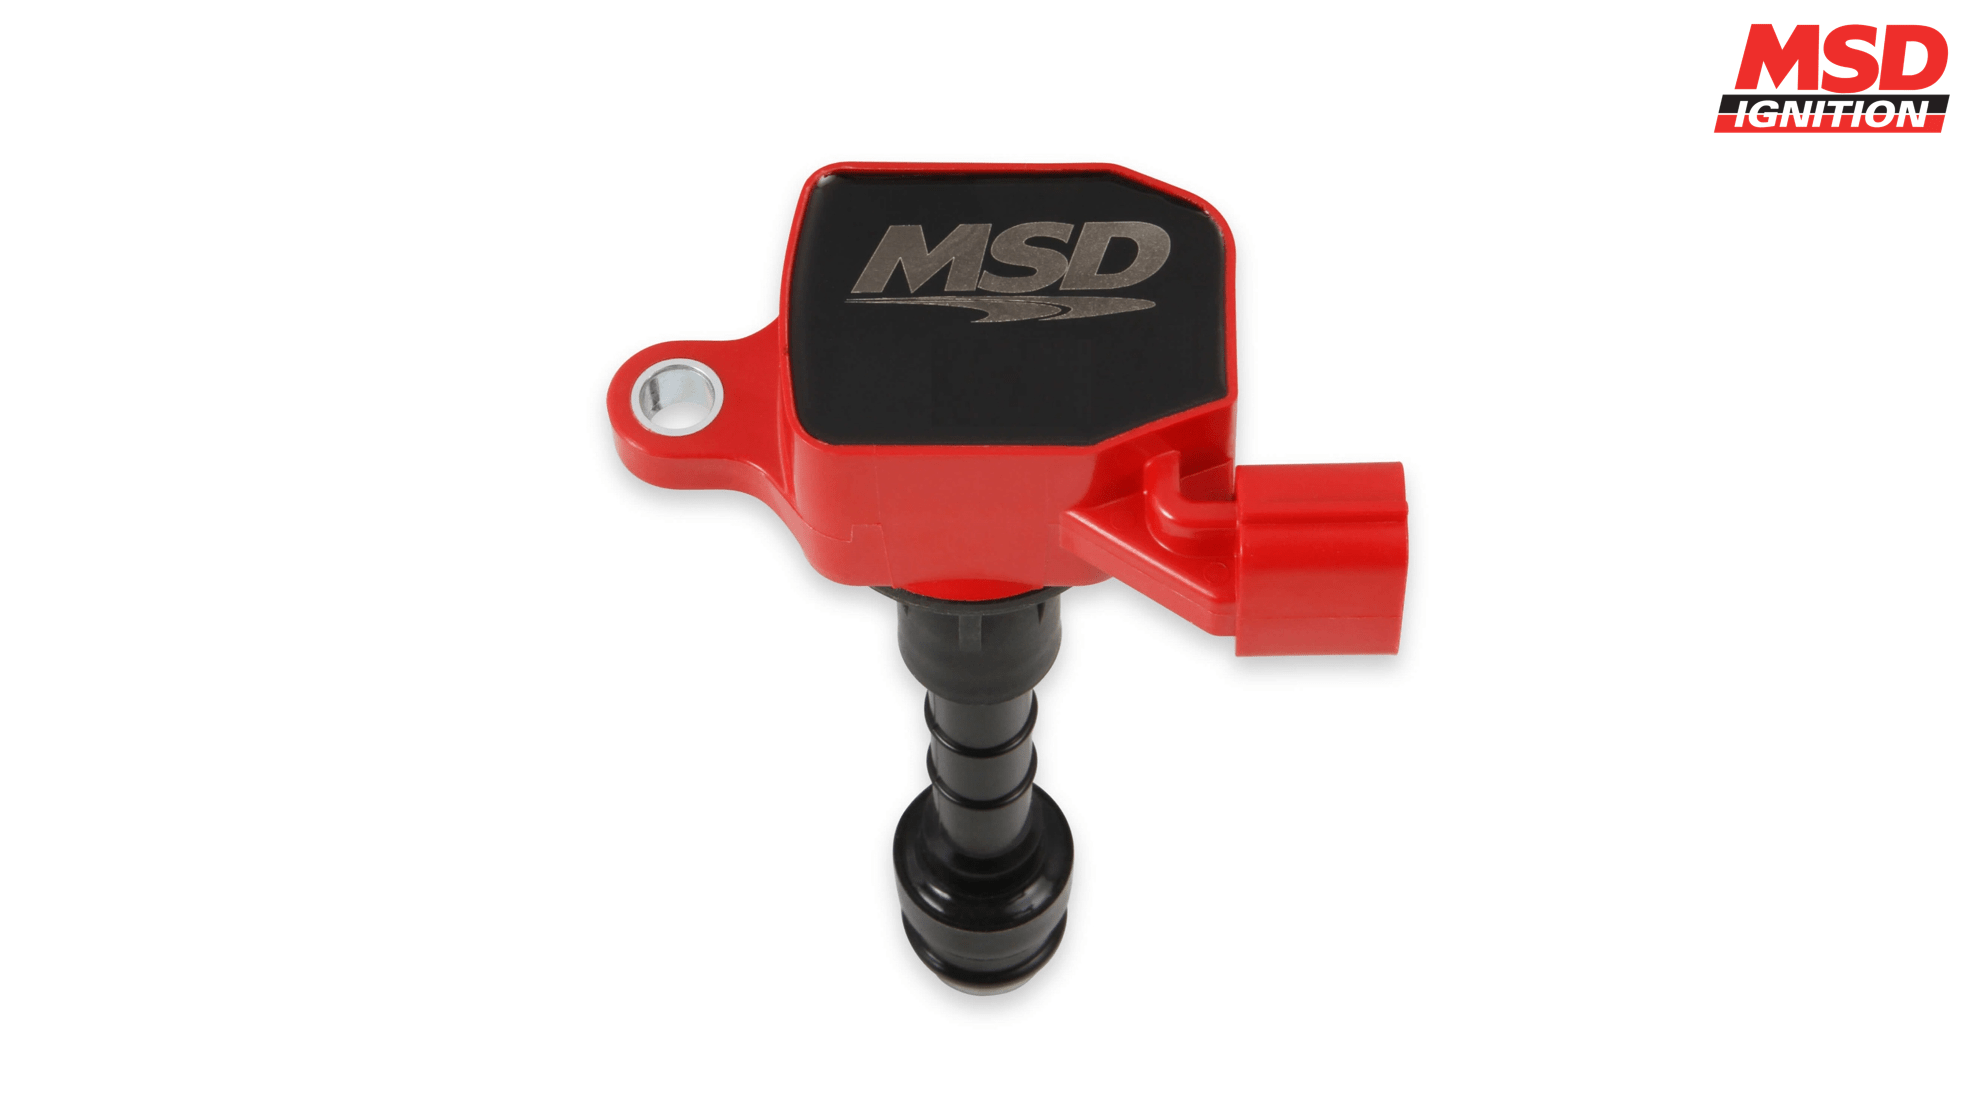 Get MSD Blaster Series Red Ignition Coil At The Best Price. Enjoy Hassle Free Shipping.